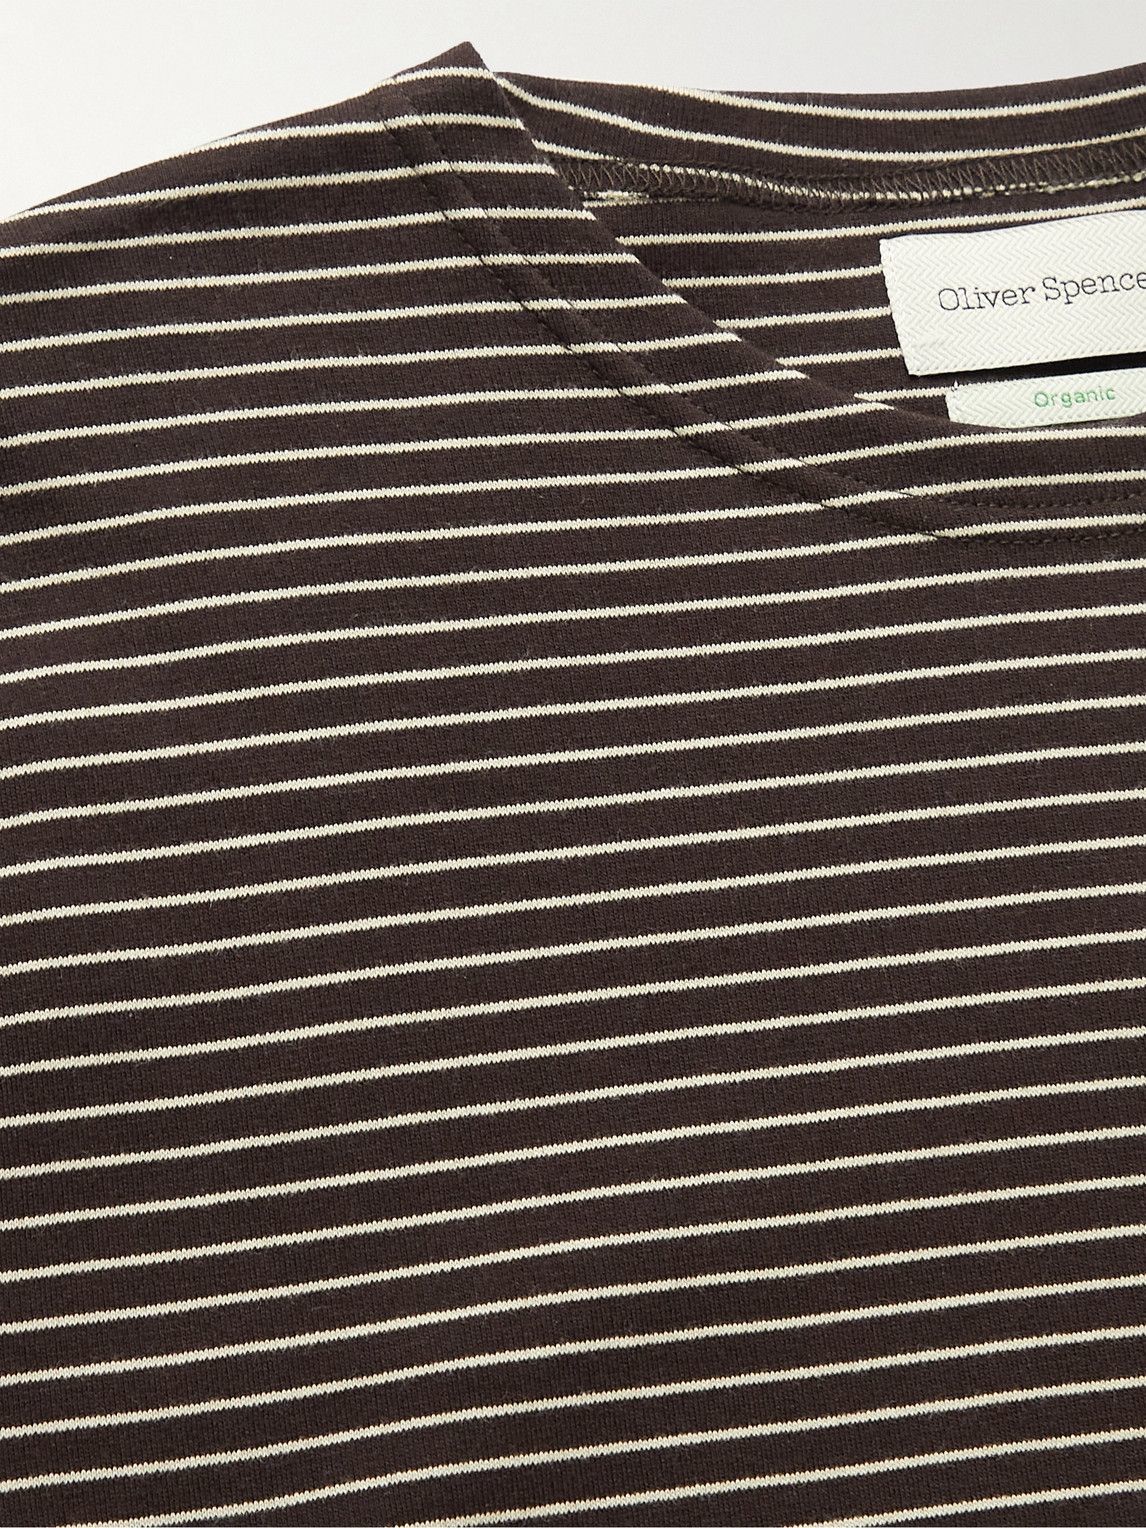 Oliver Spencer - Newport Striped Organic Cotton-Jersey T-Shirt - Brown